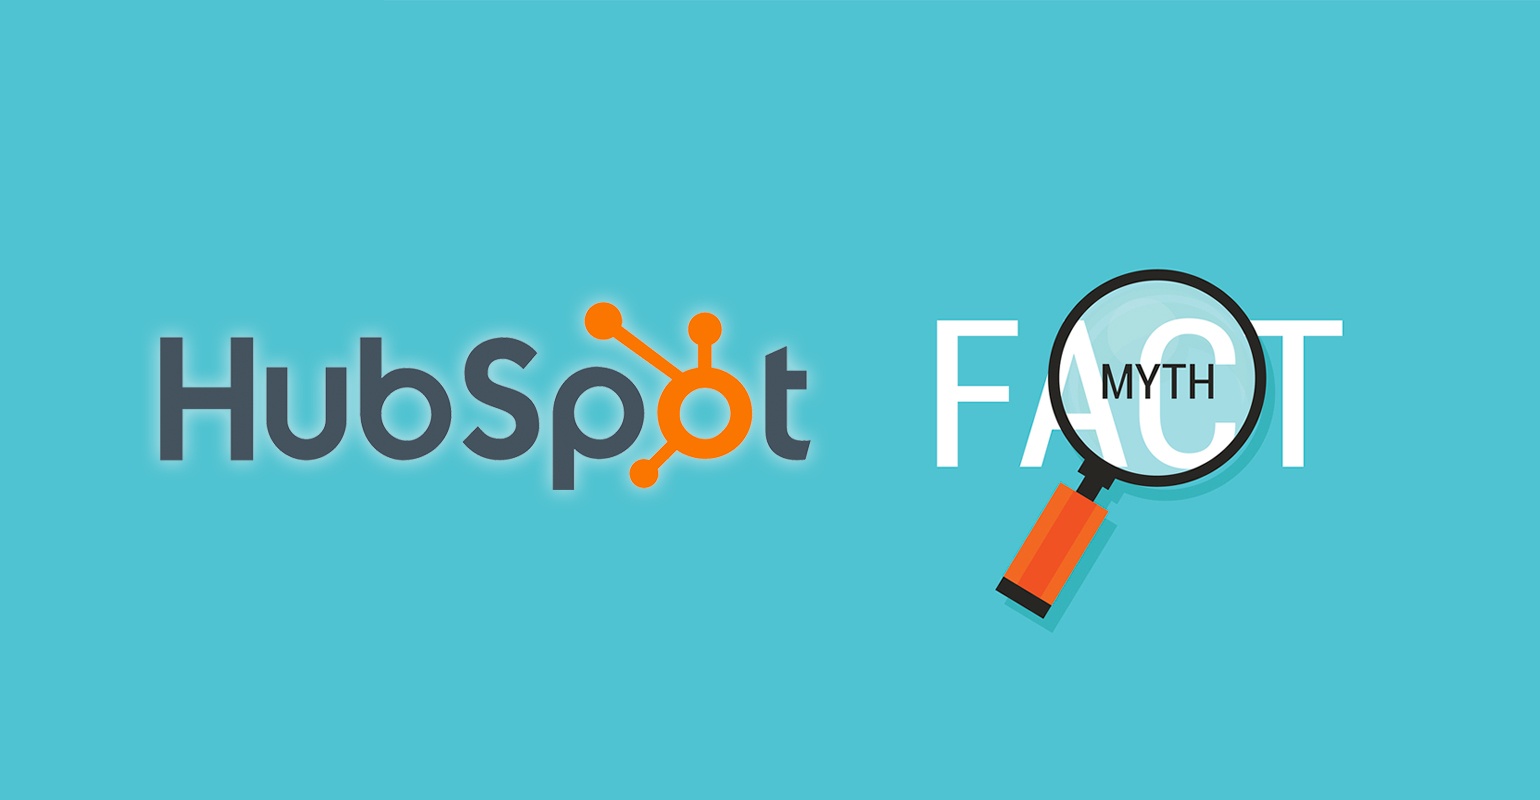 6 common misconceptions about Hubspot